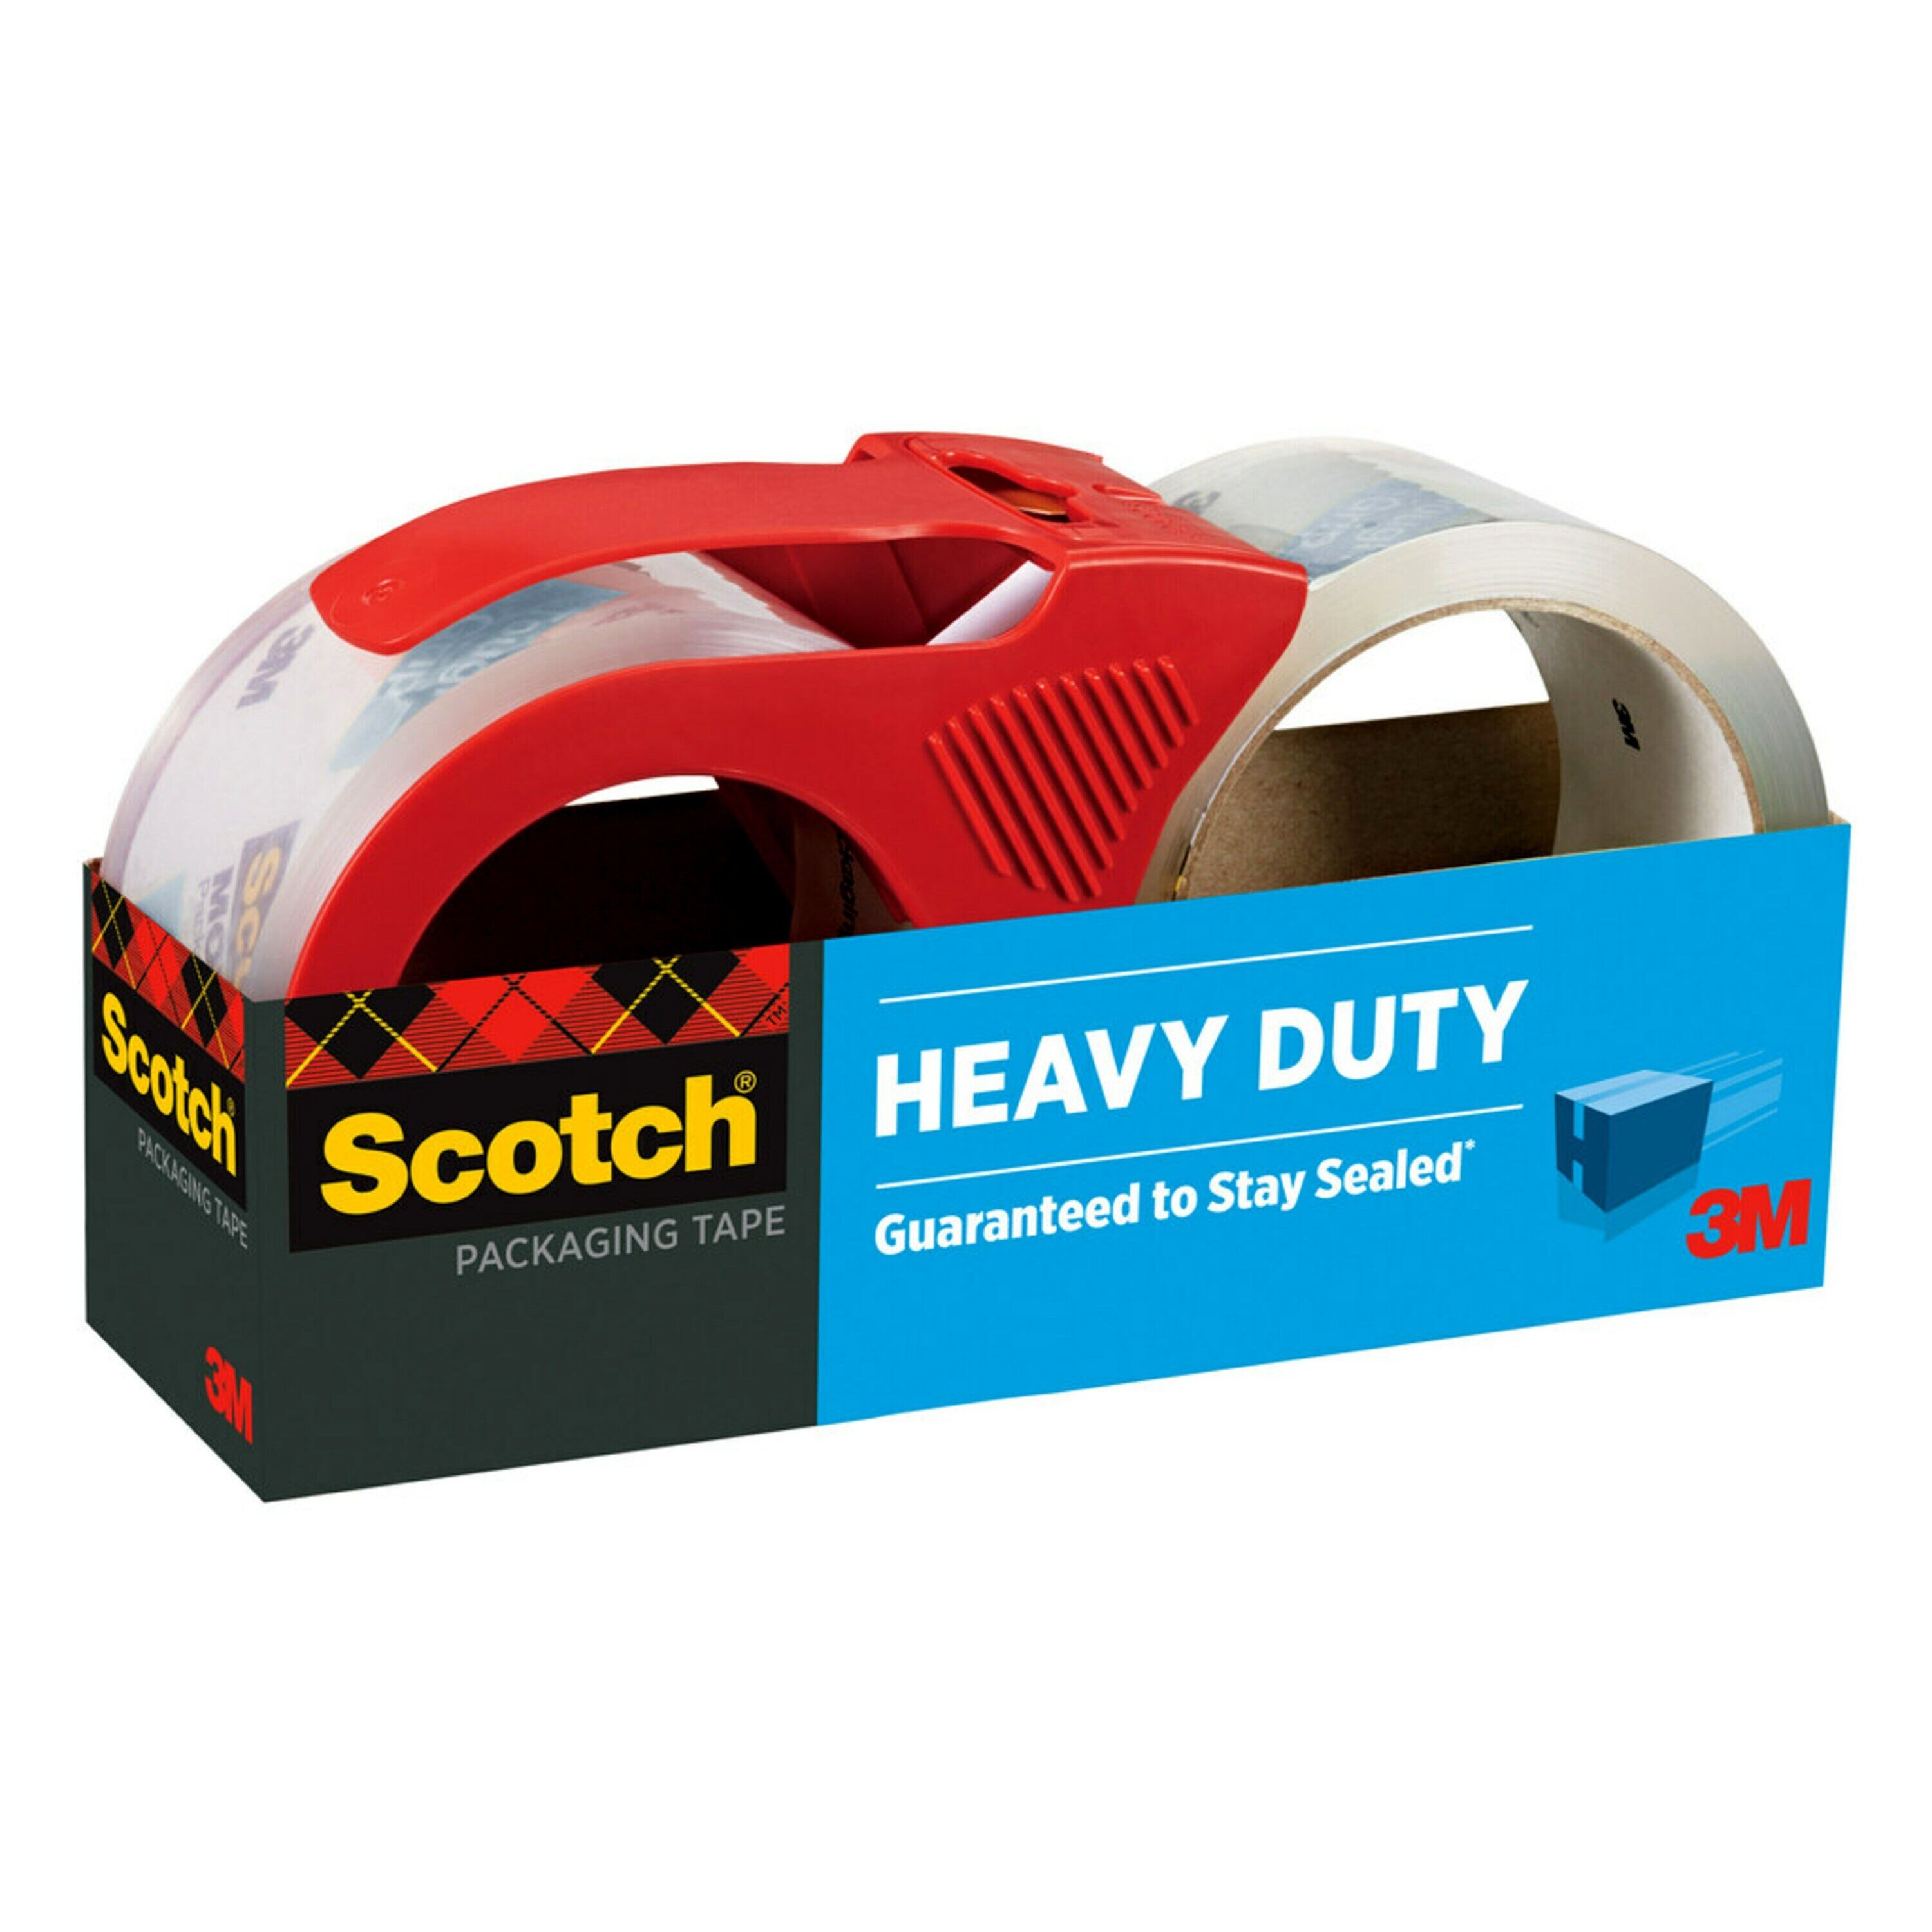 Scotch Heavy-Duty Fasteners, Clear - 2 Sets Of 1'' X 3'' Strips - MICA Store